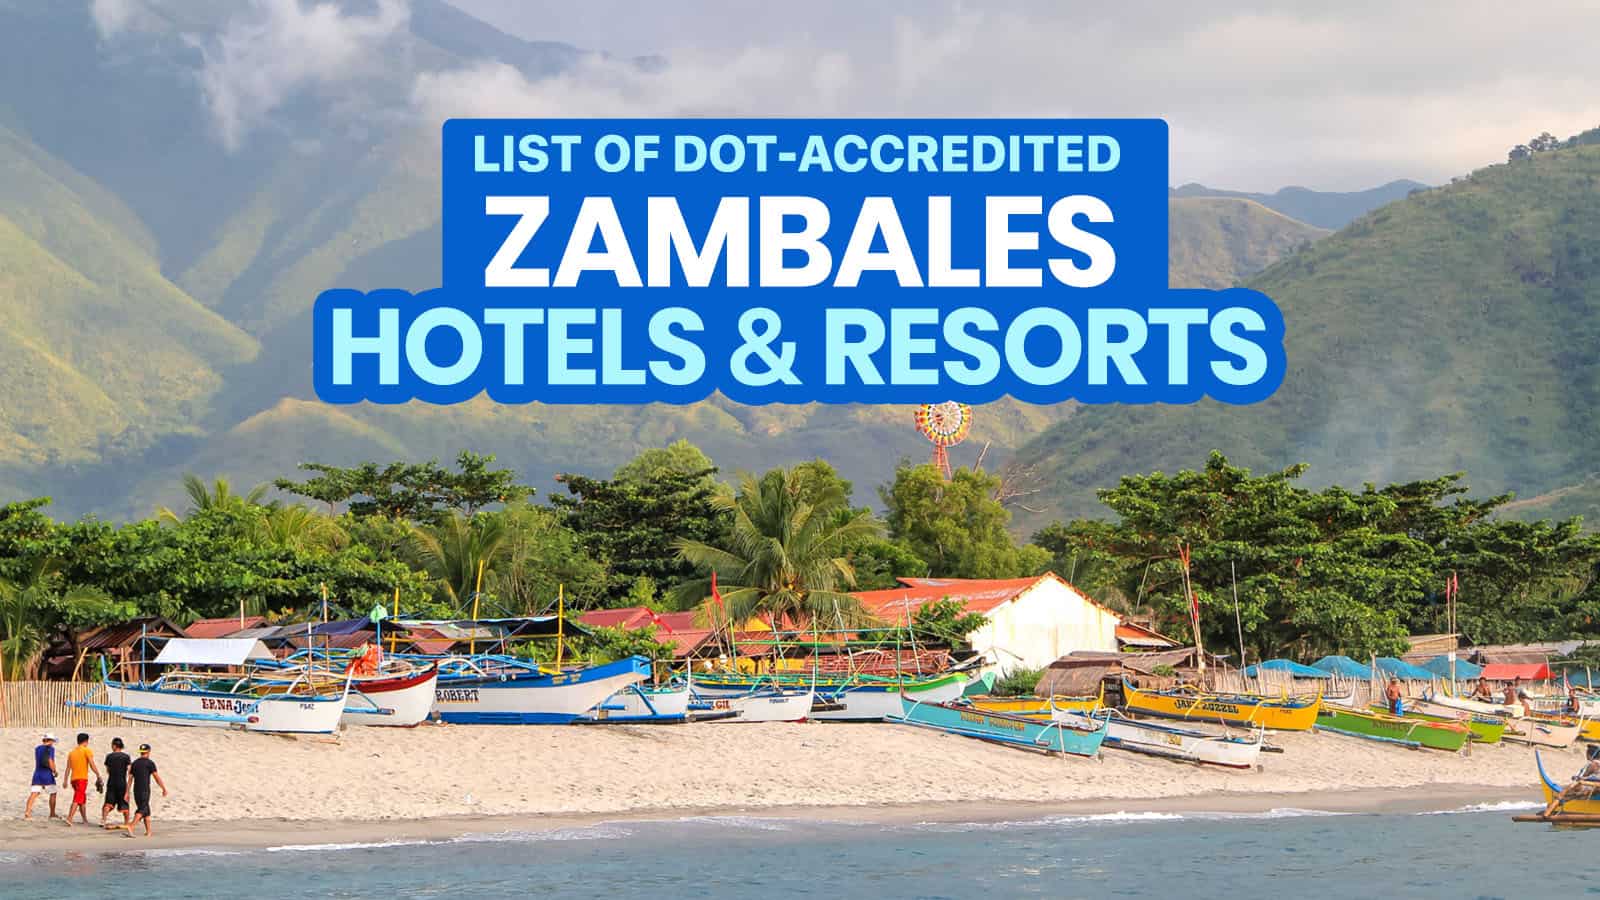 List of DOT-Accredited Hotels & Resorts in ZAMBALES & SUBIC